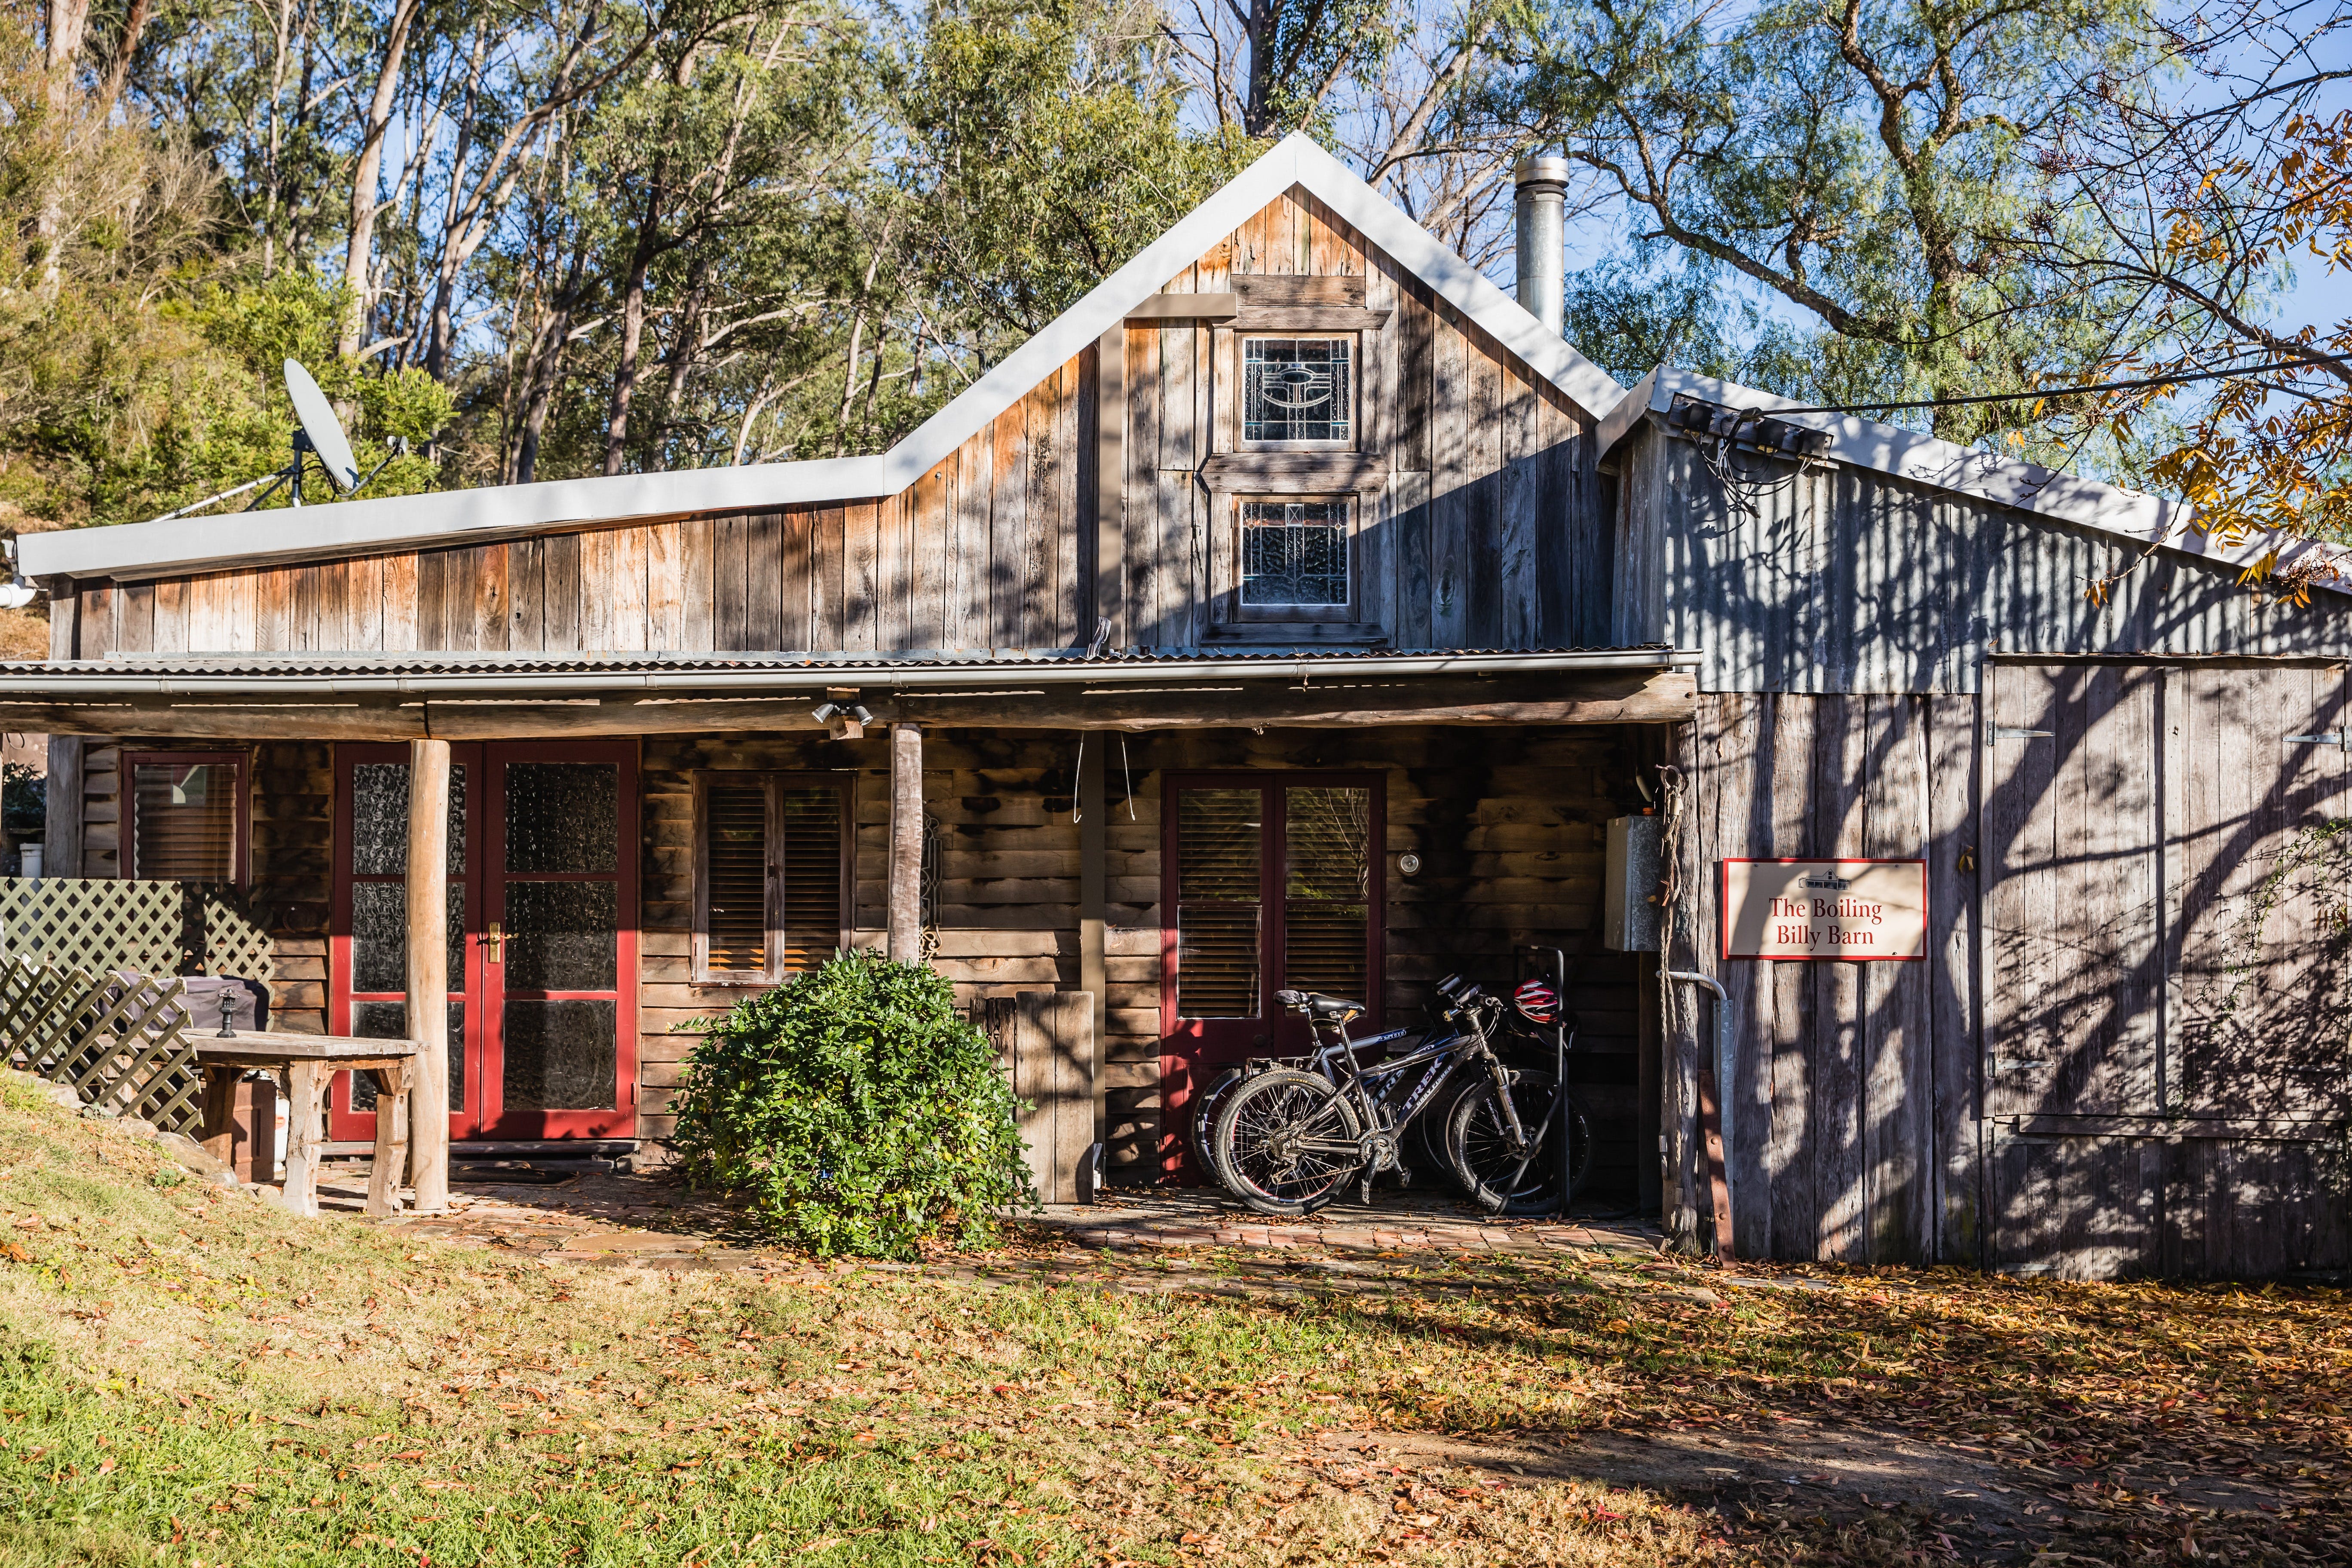 The Boiling Billy Barn - Lismore Accommodation